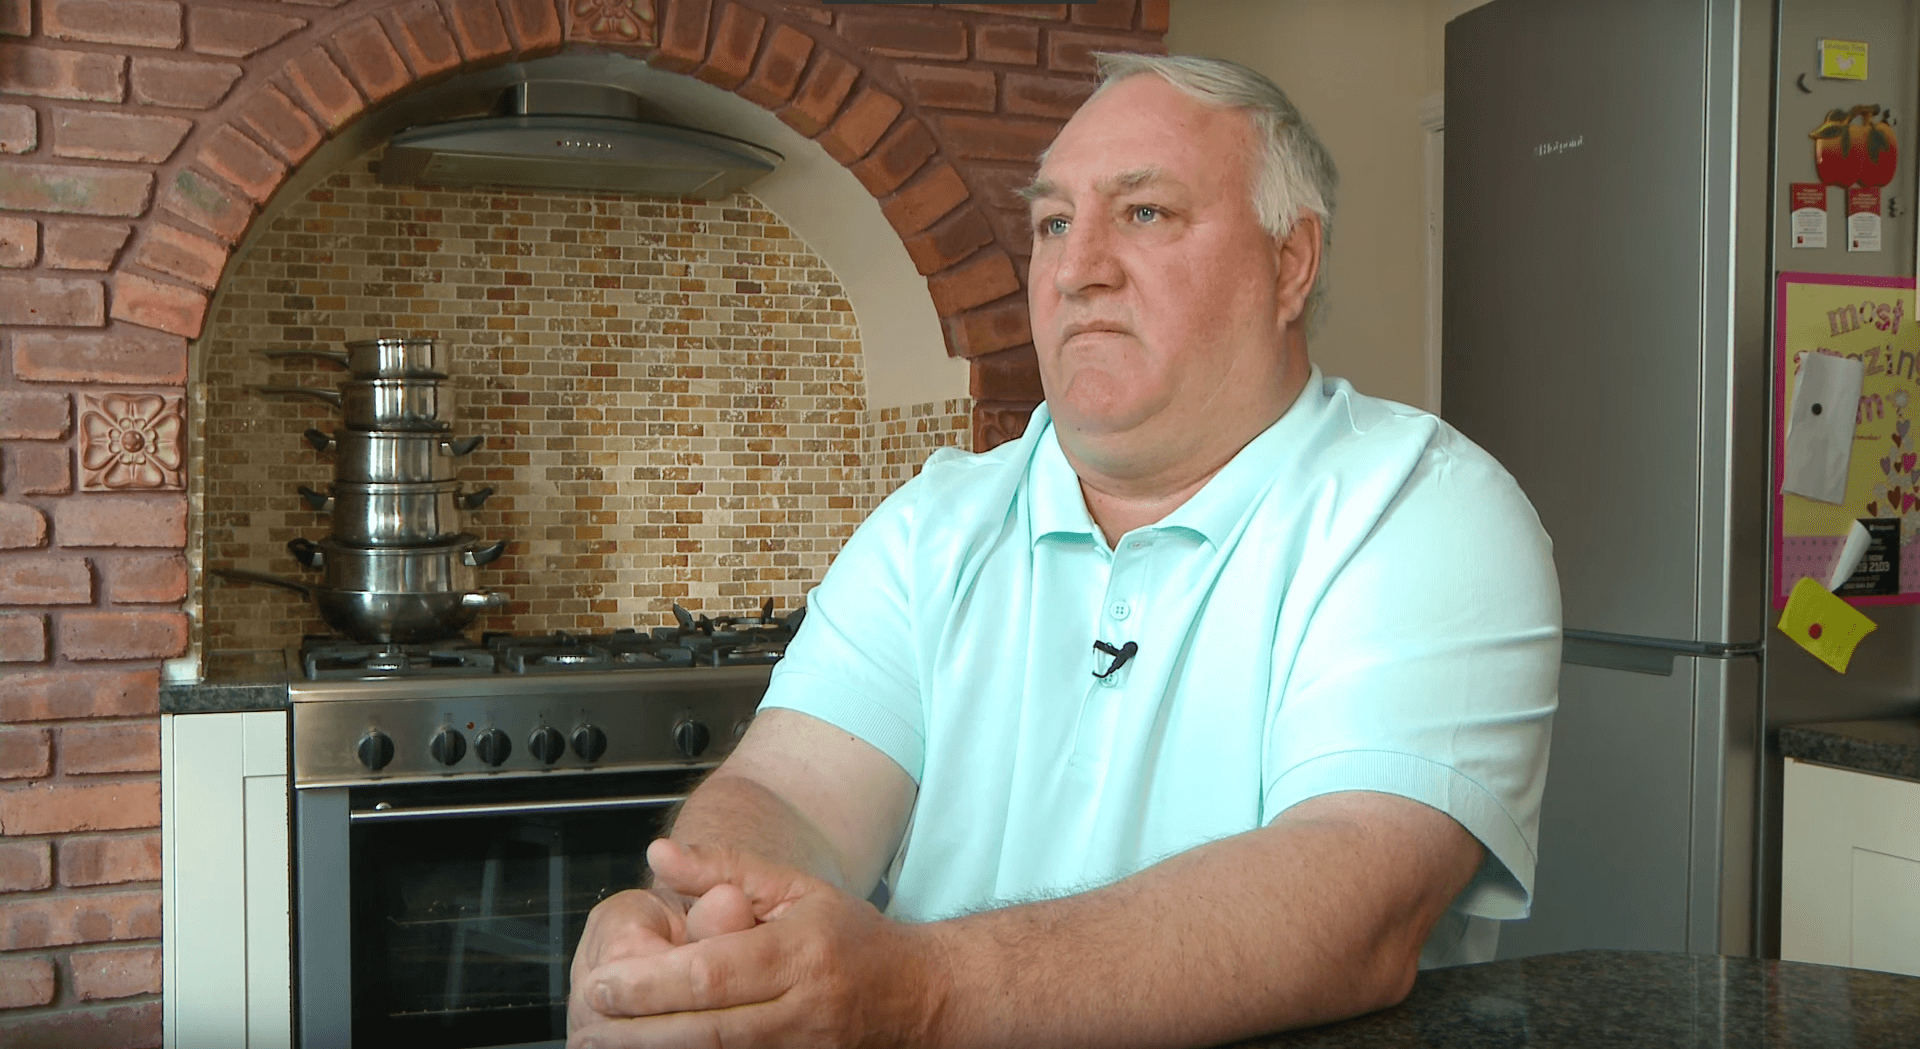 A man sits in his kitchen clasping his hands, his expression is serious